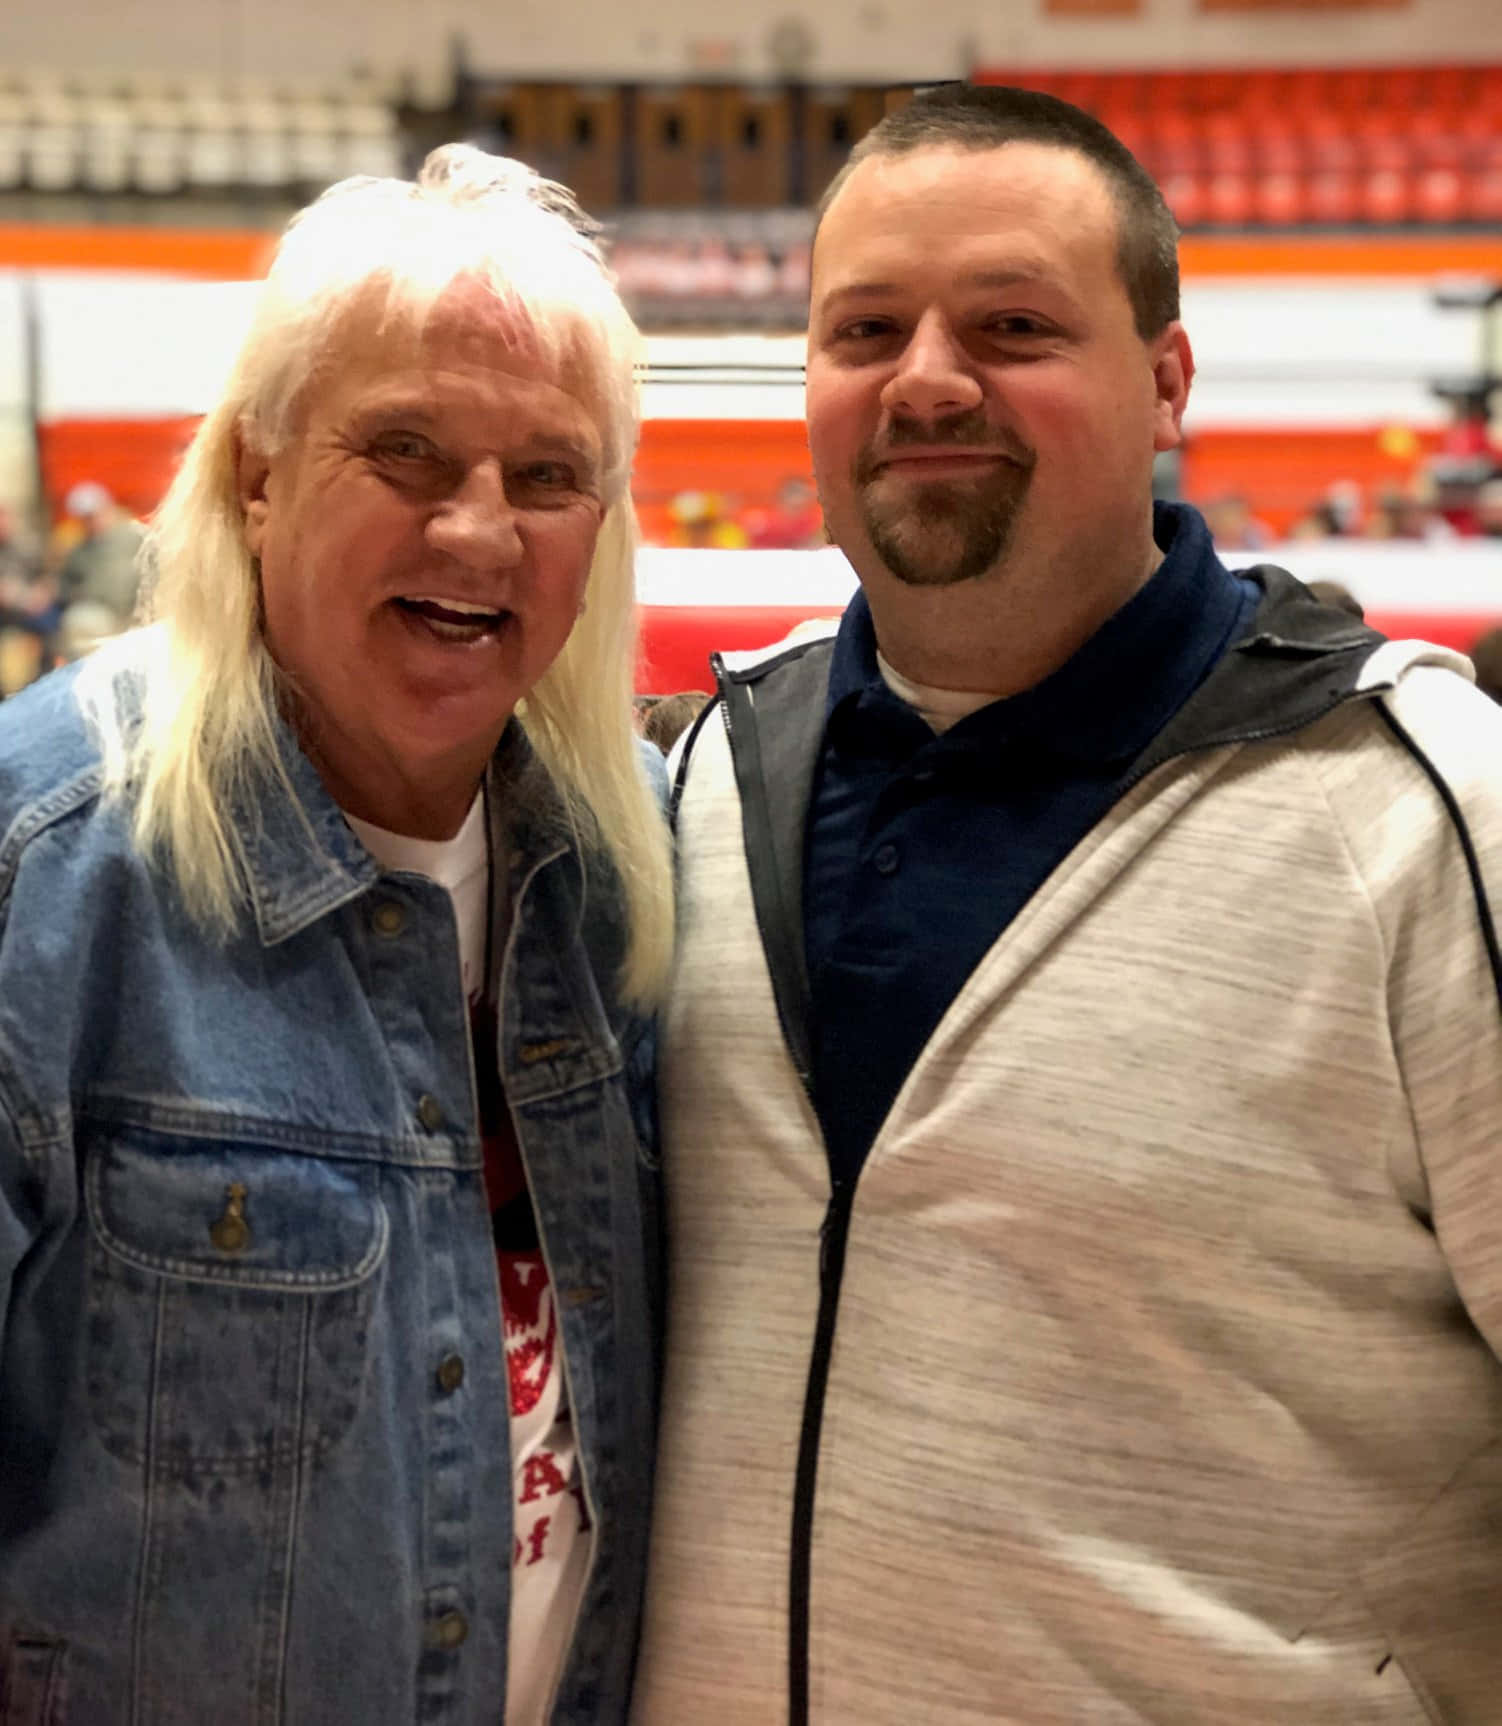 Ricky Morton Photograph With Scotty Campbell Wallpaper